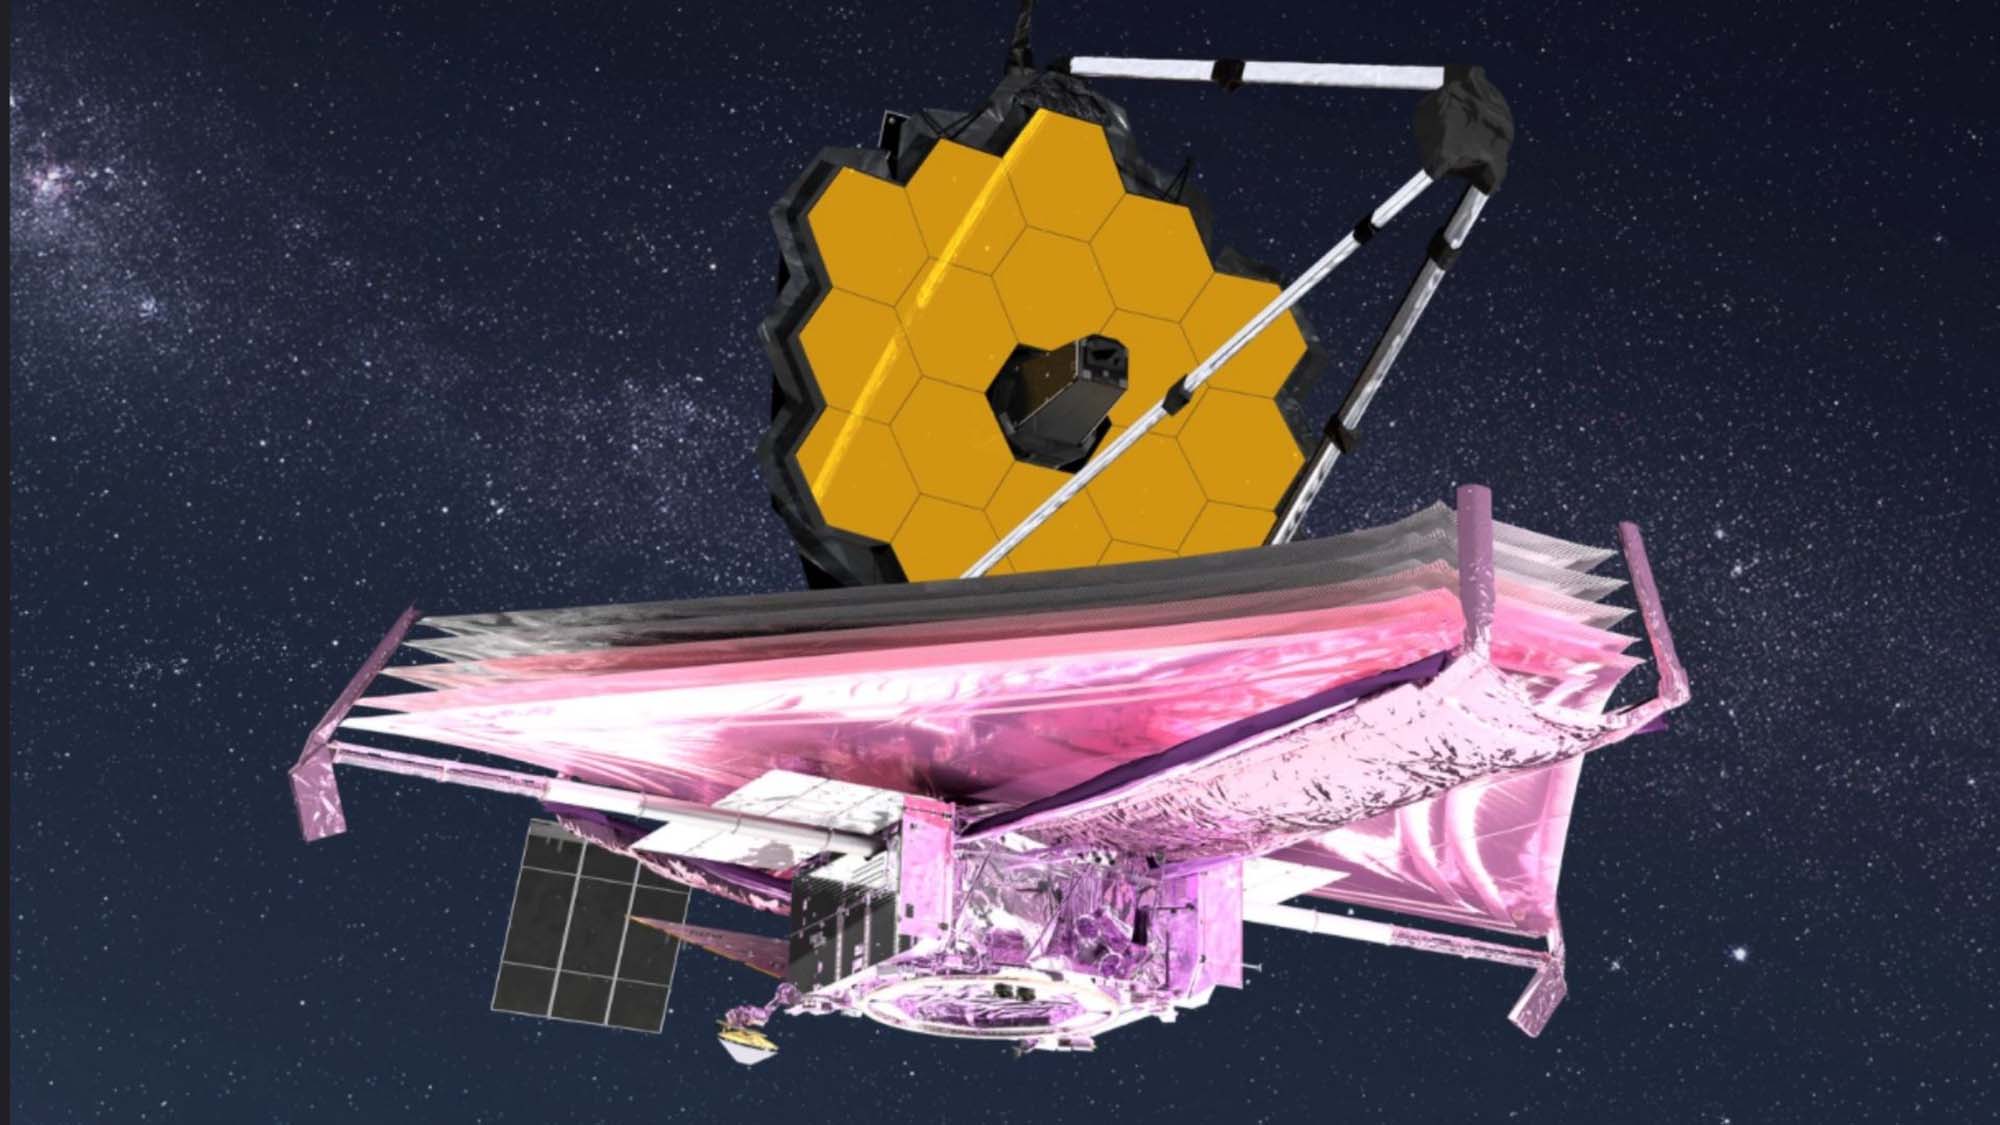 An artist’s conception of the James Webb Space Telescope in space.